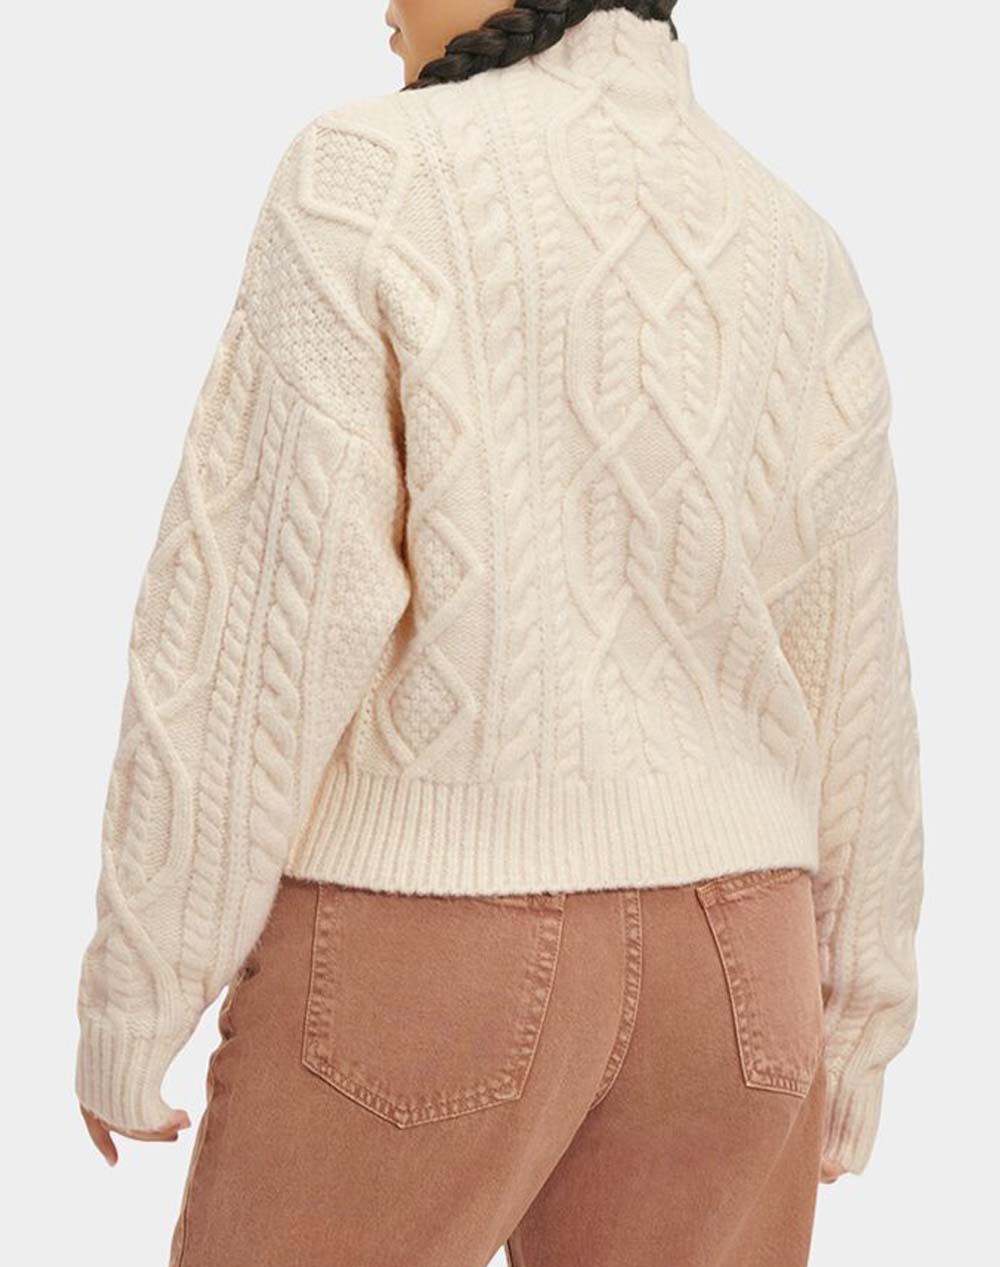 UGG Janae Cable Knit Sweater Short